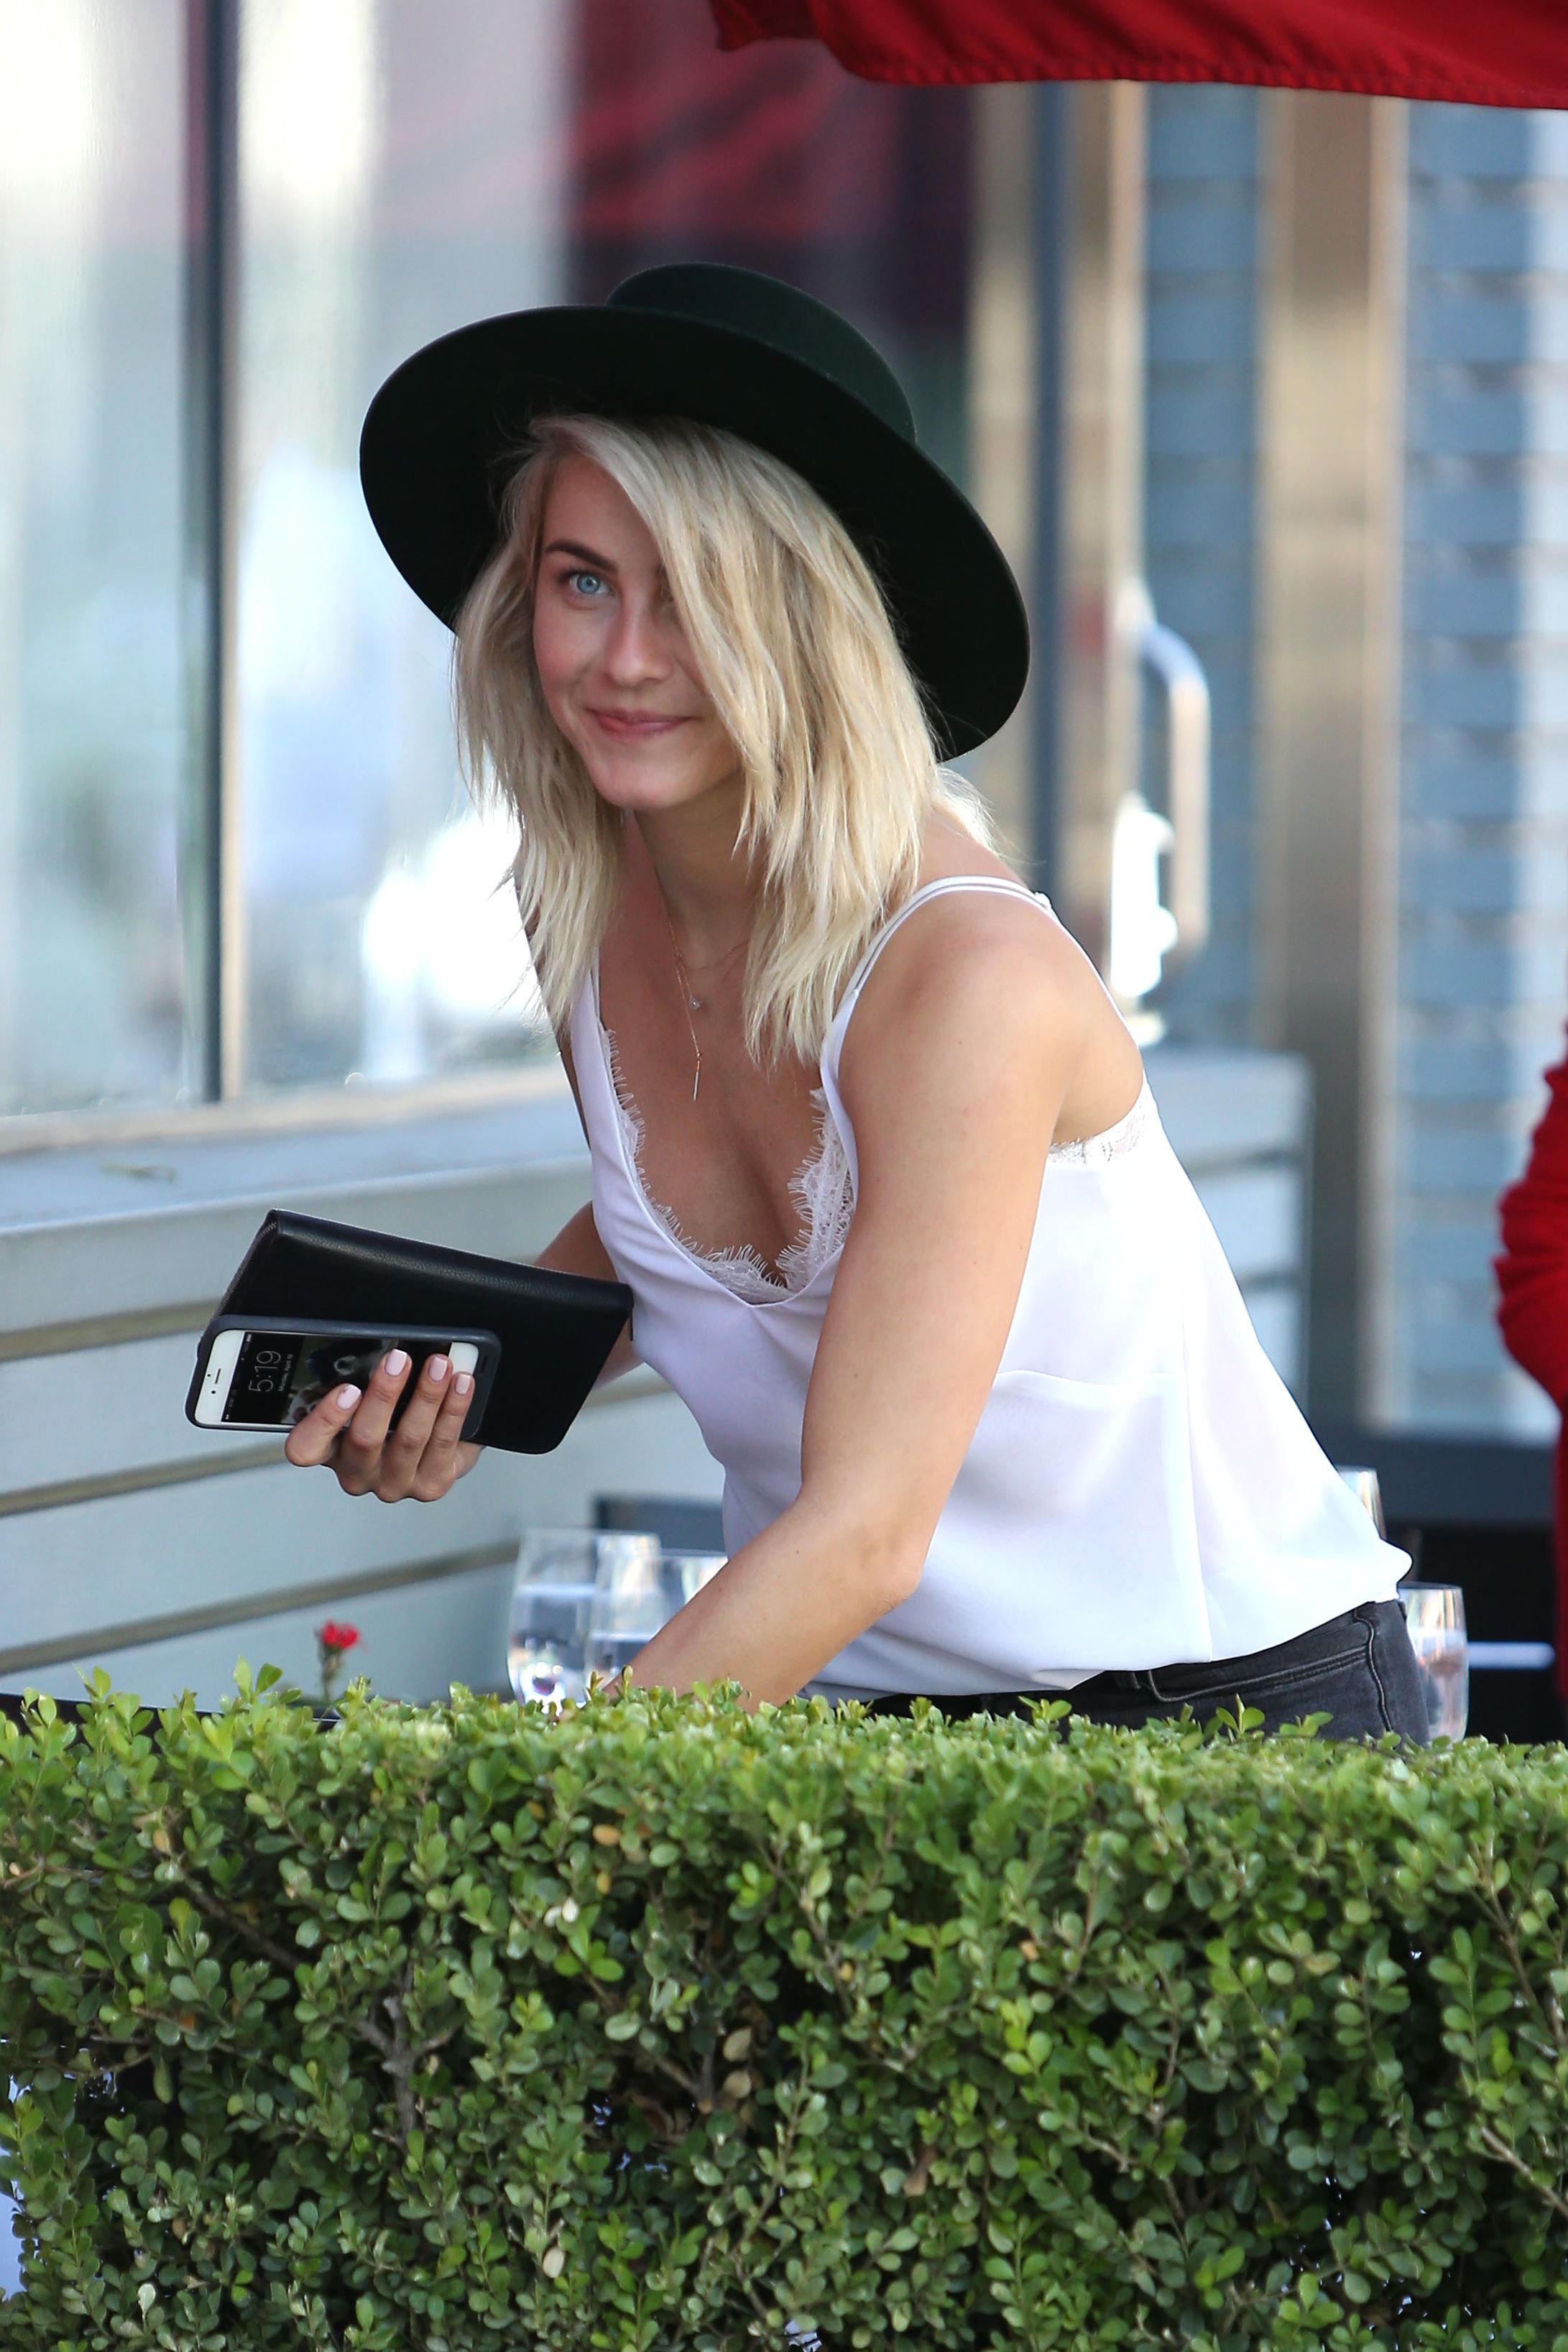 julianne-hough-downblouse-cleavage-in-west-hollywood-03.jpg